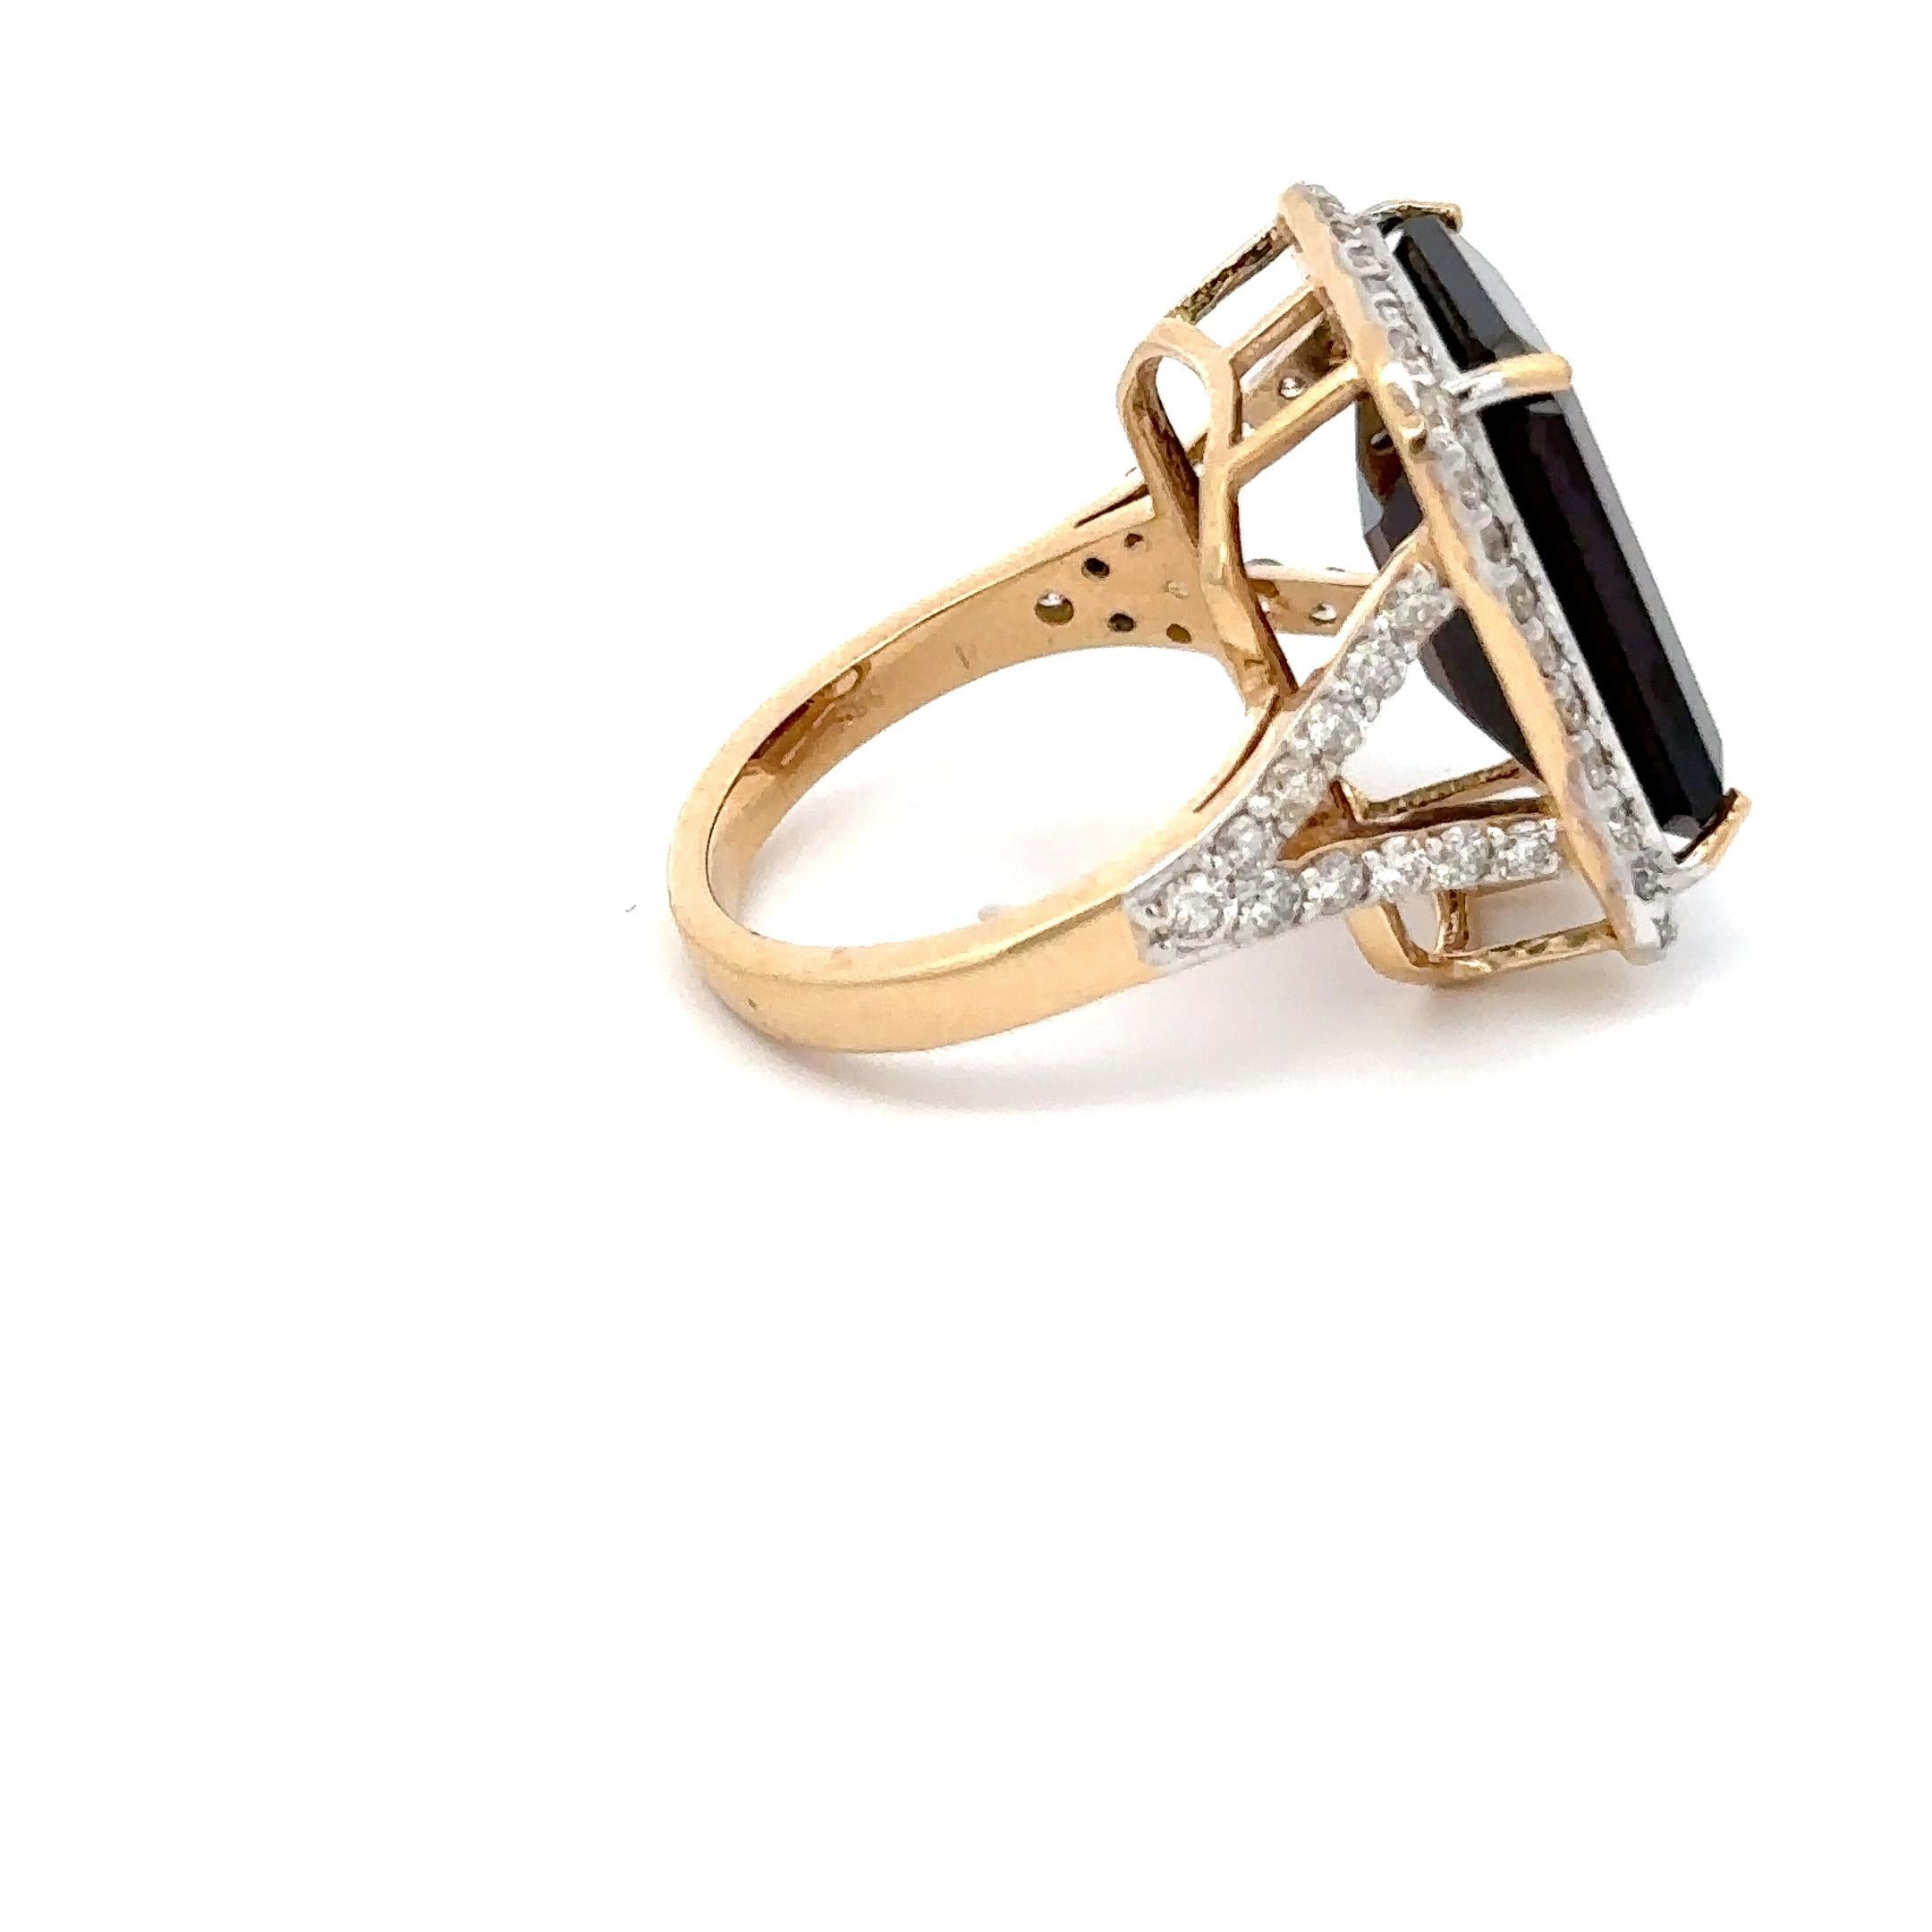 For Sale:  Large 14.54 Ct Garnet Diamond Cocktail Ring in 14k Solid Yellow Gold Certified 10